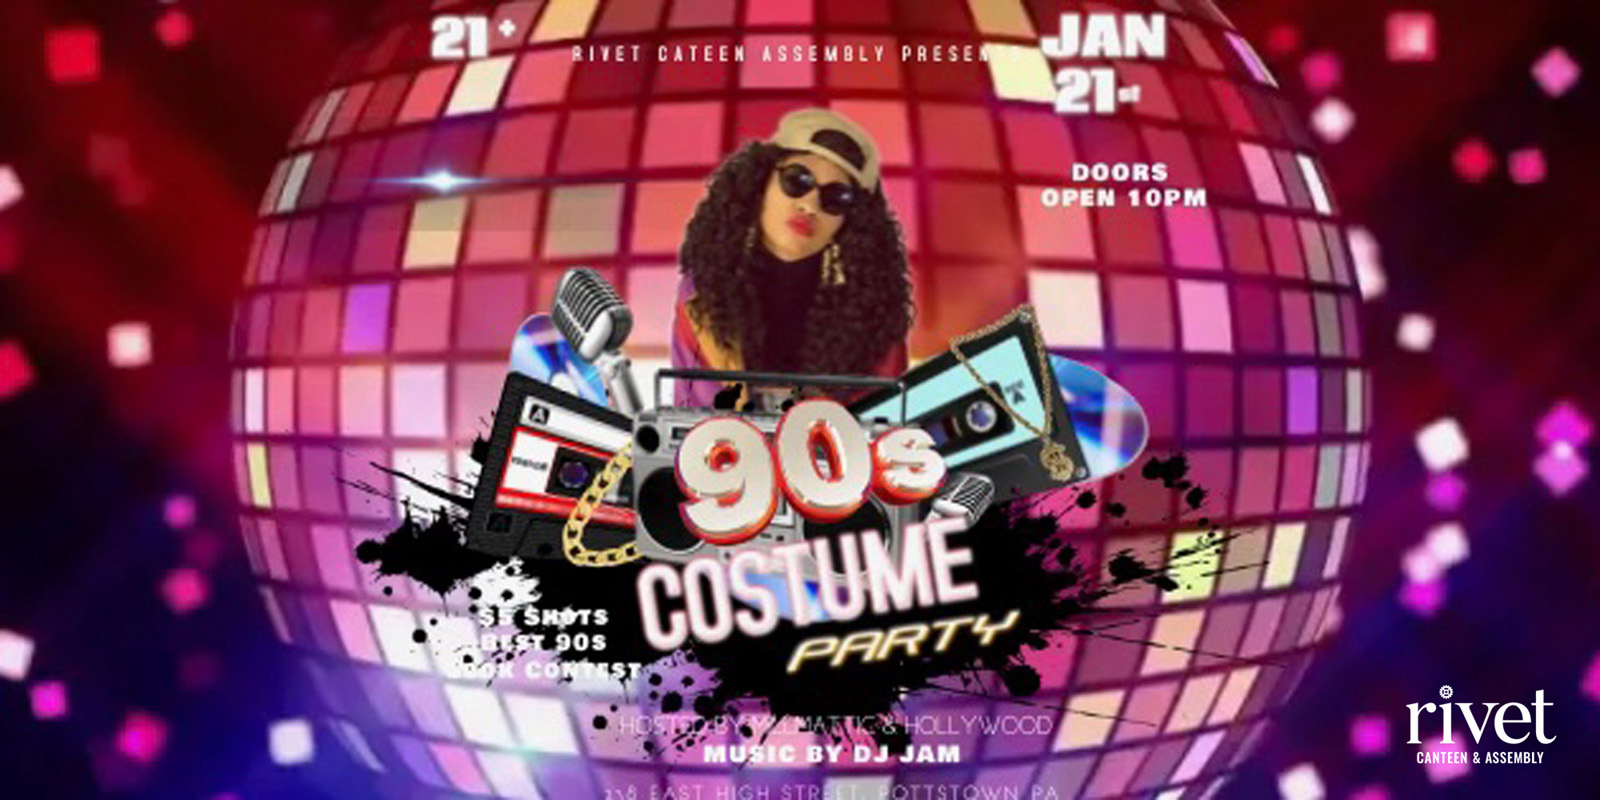 90s Costume Party at Rivet's Union Quarters on Saturday, January 21st, 2023!